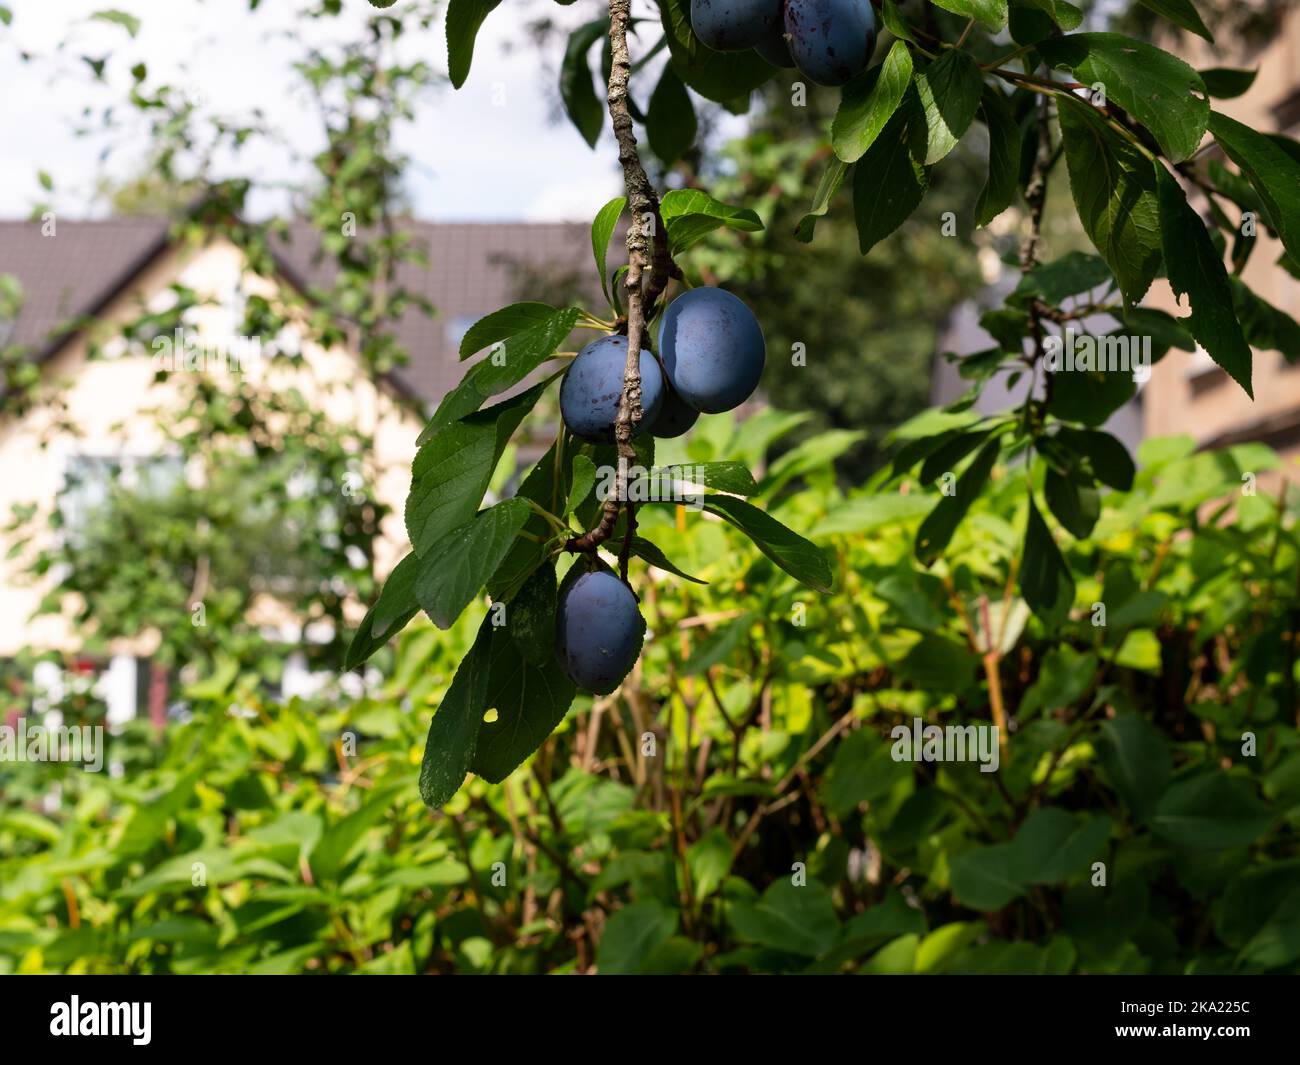 Ripe plums on a tree in Germany. Blue fruits hanging on a twig in a garden. The natural organic food is healthy. The fresh and raw drupe is ripe. Stock Photo